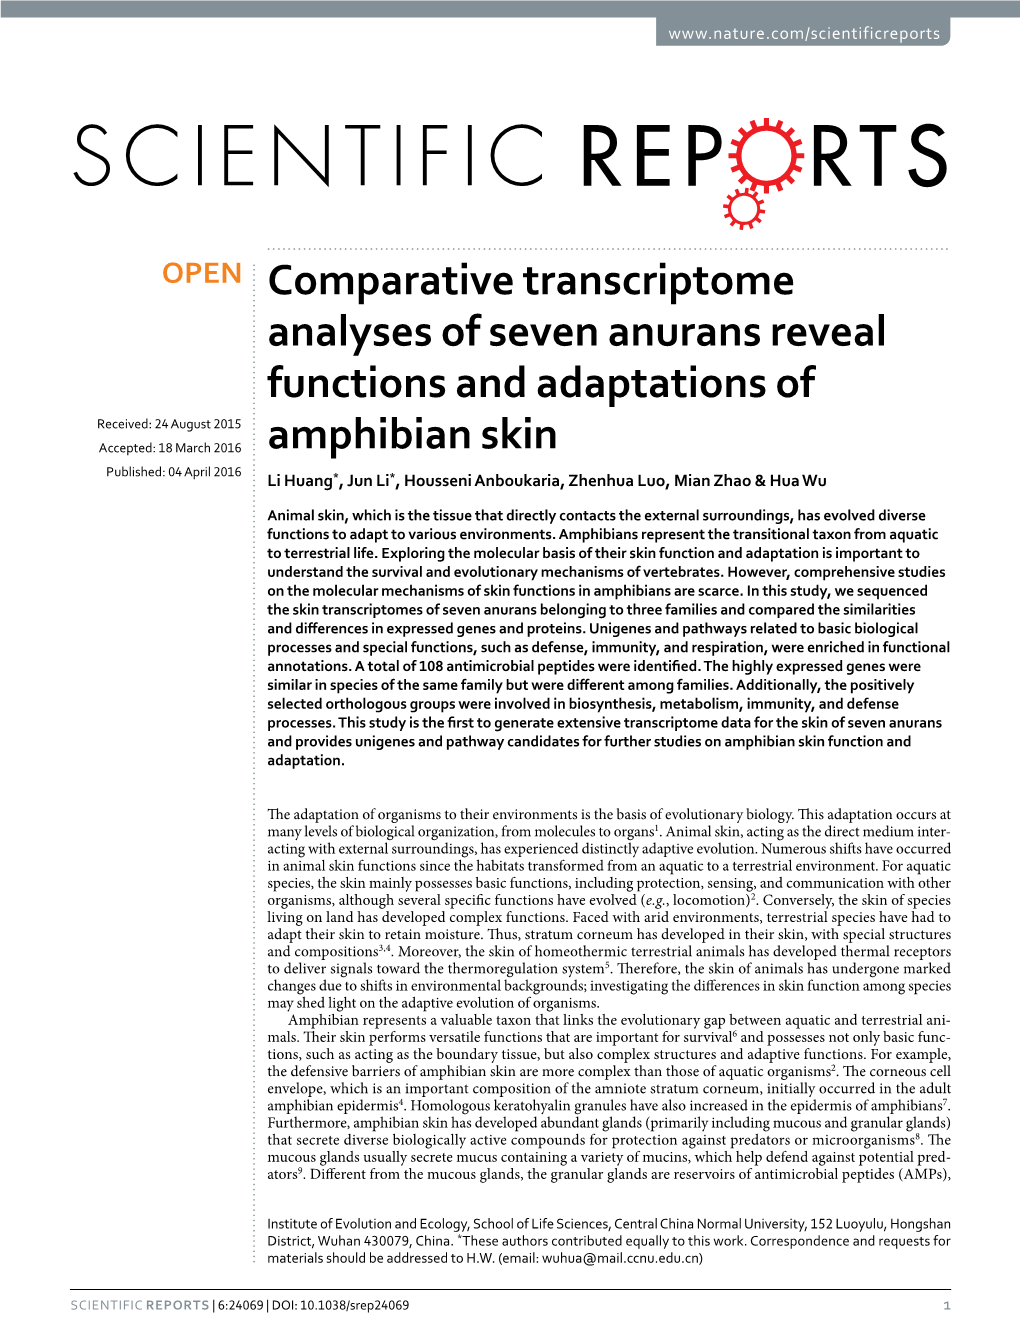 Comparative Transcriptome Analyses of Seven Anurans Reveal Functions